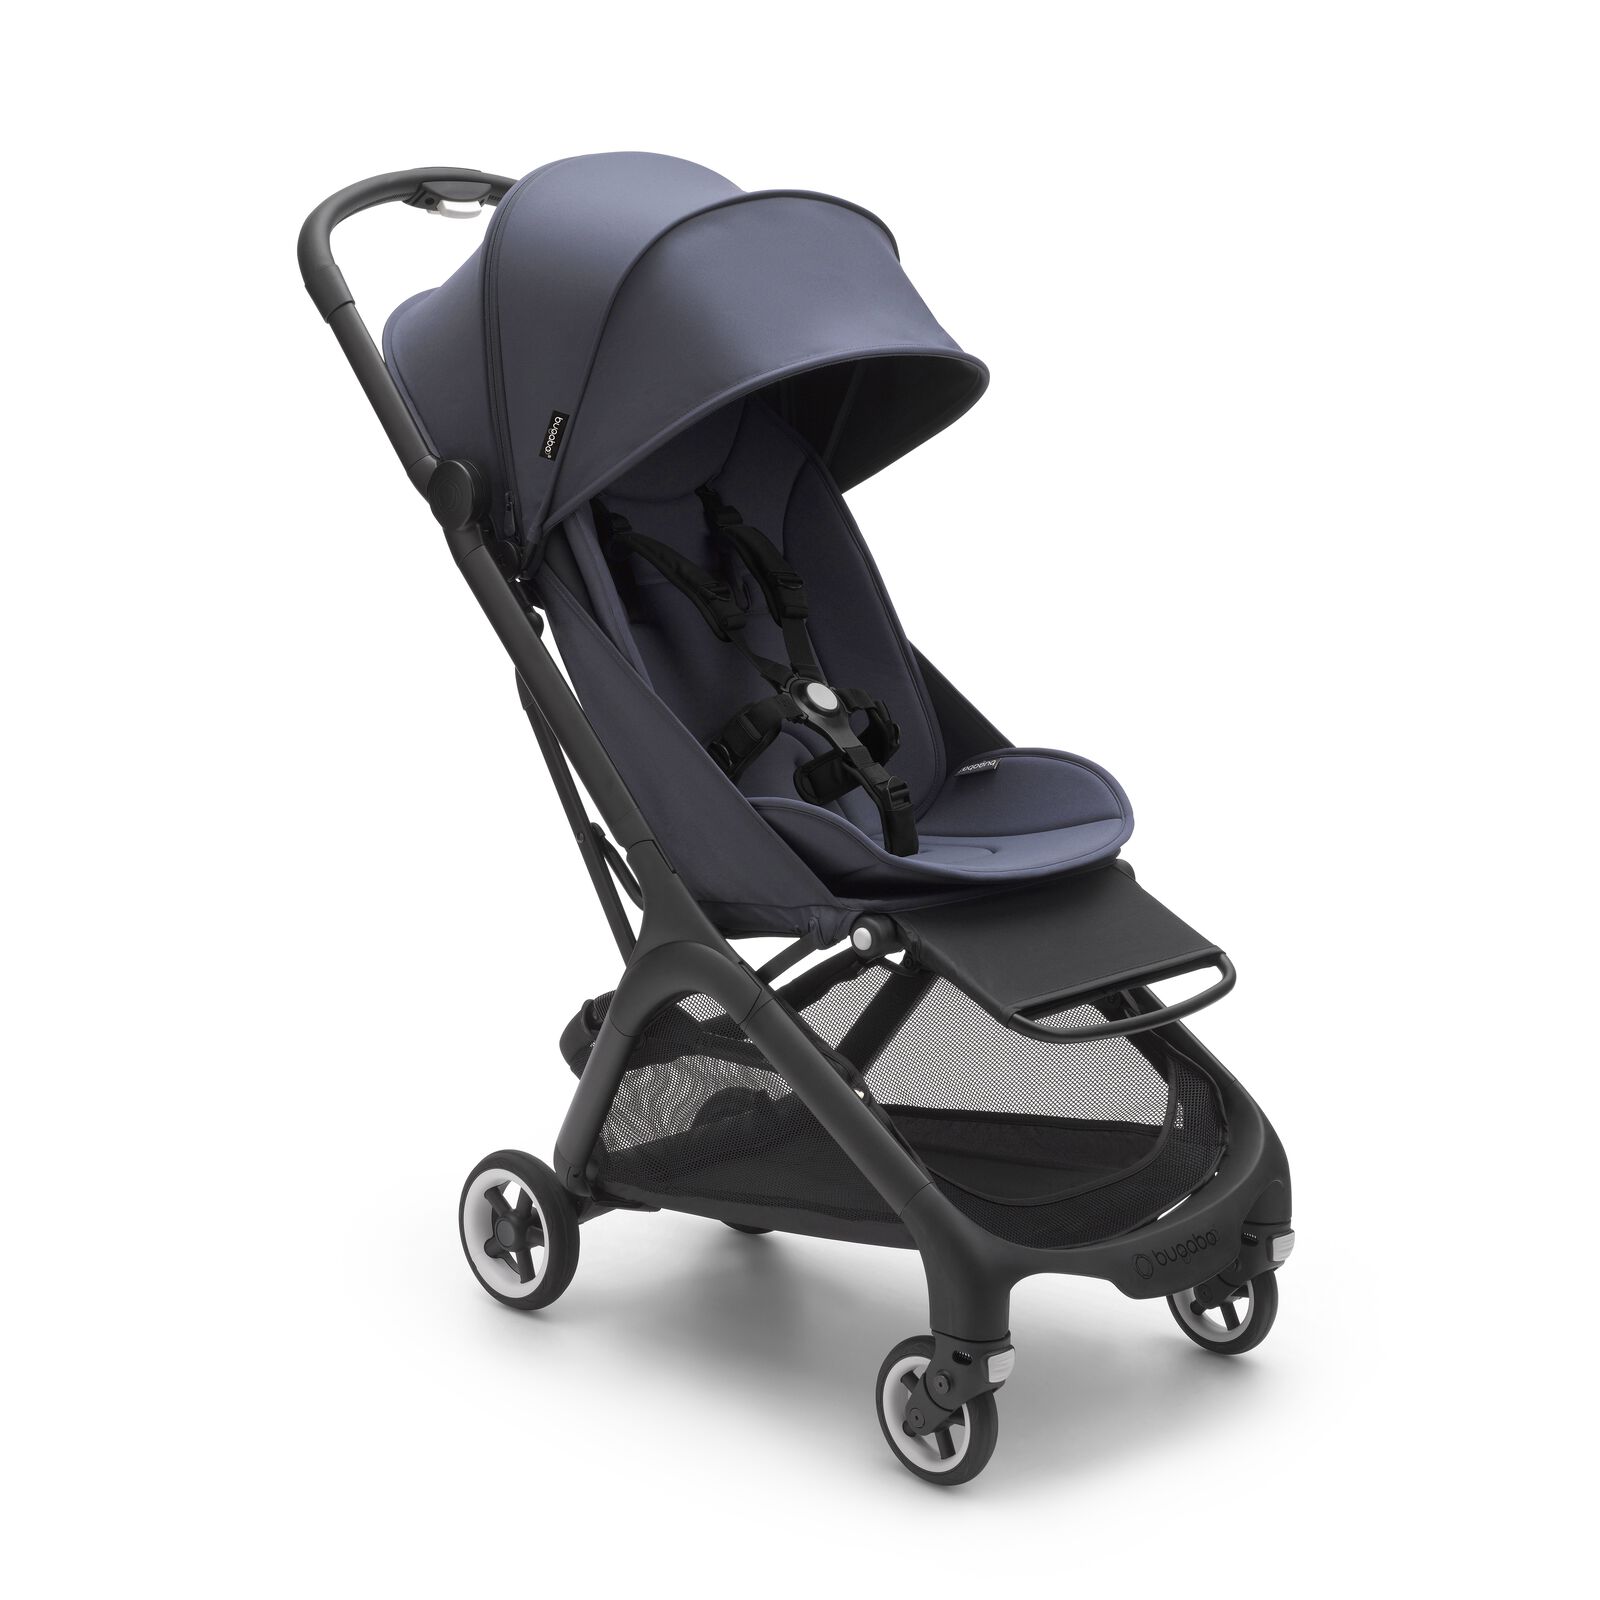 Bugaboo Butterfly seat pram - View 14